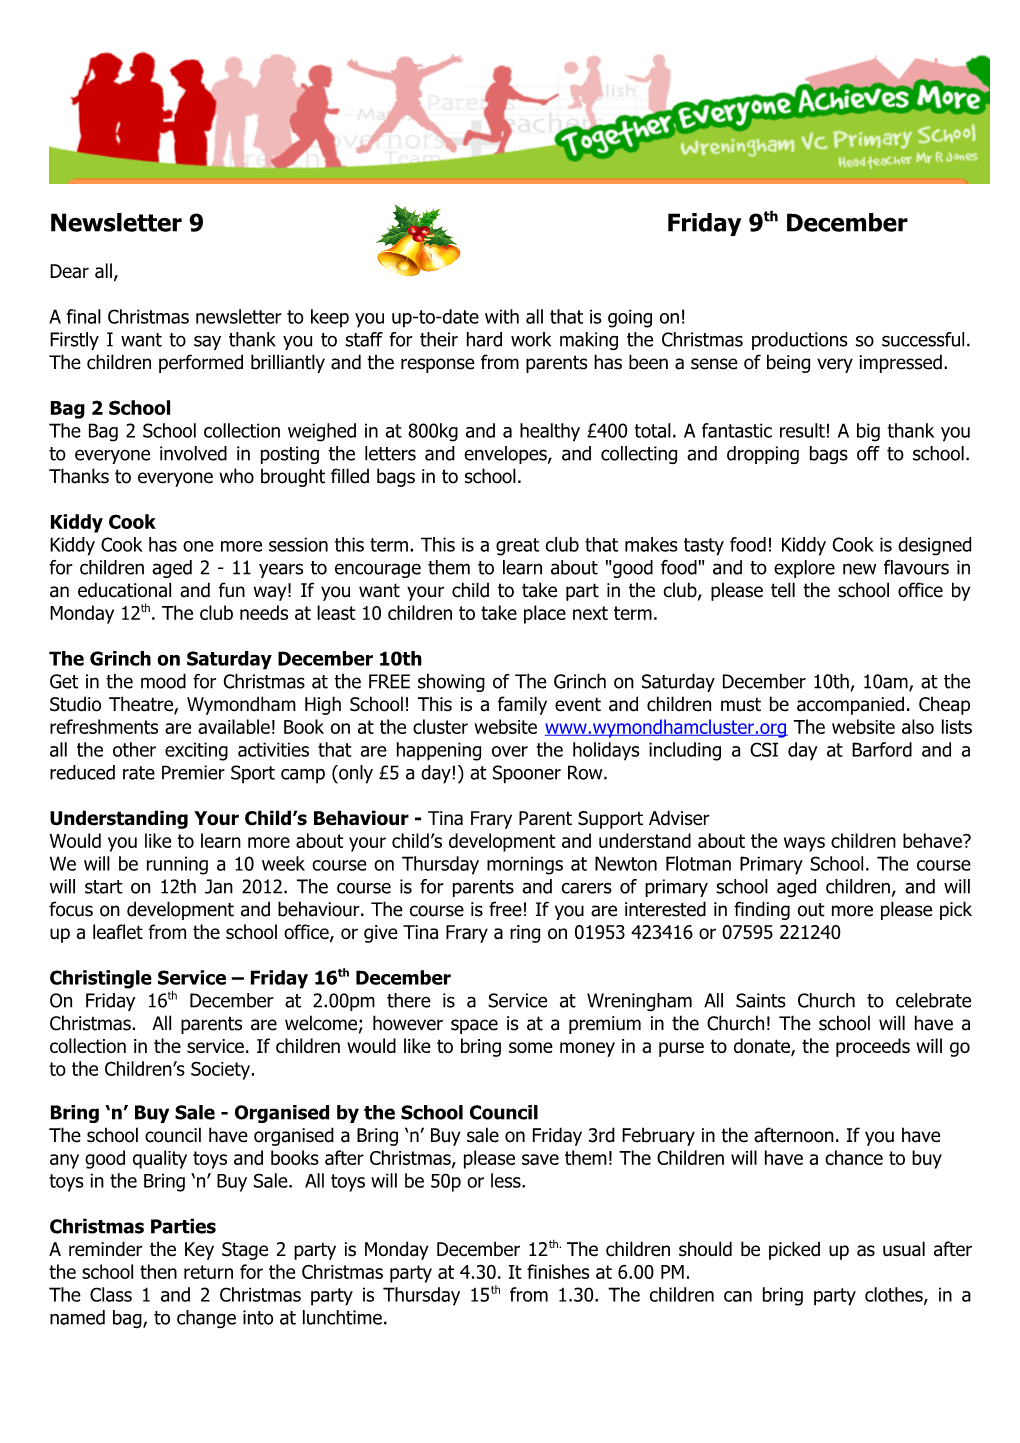 A Final Christmas Newsletter to Keep You Up-To-Date with All That Is Going On!